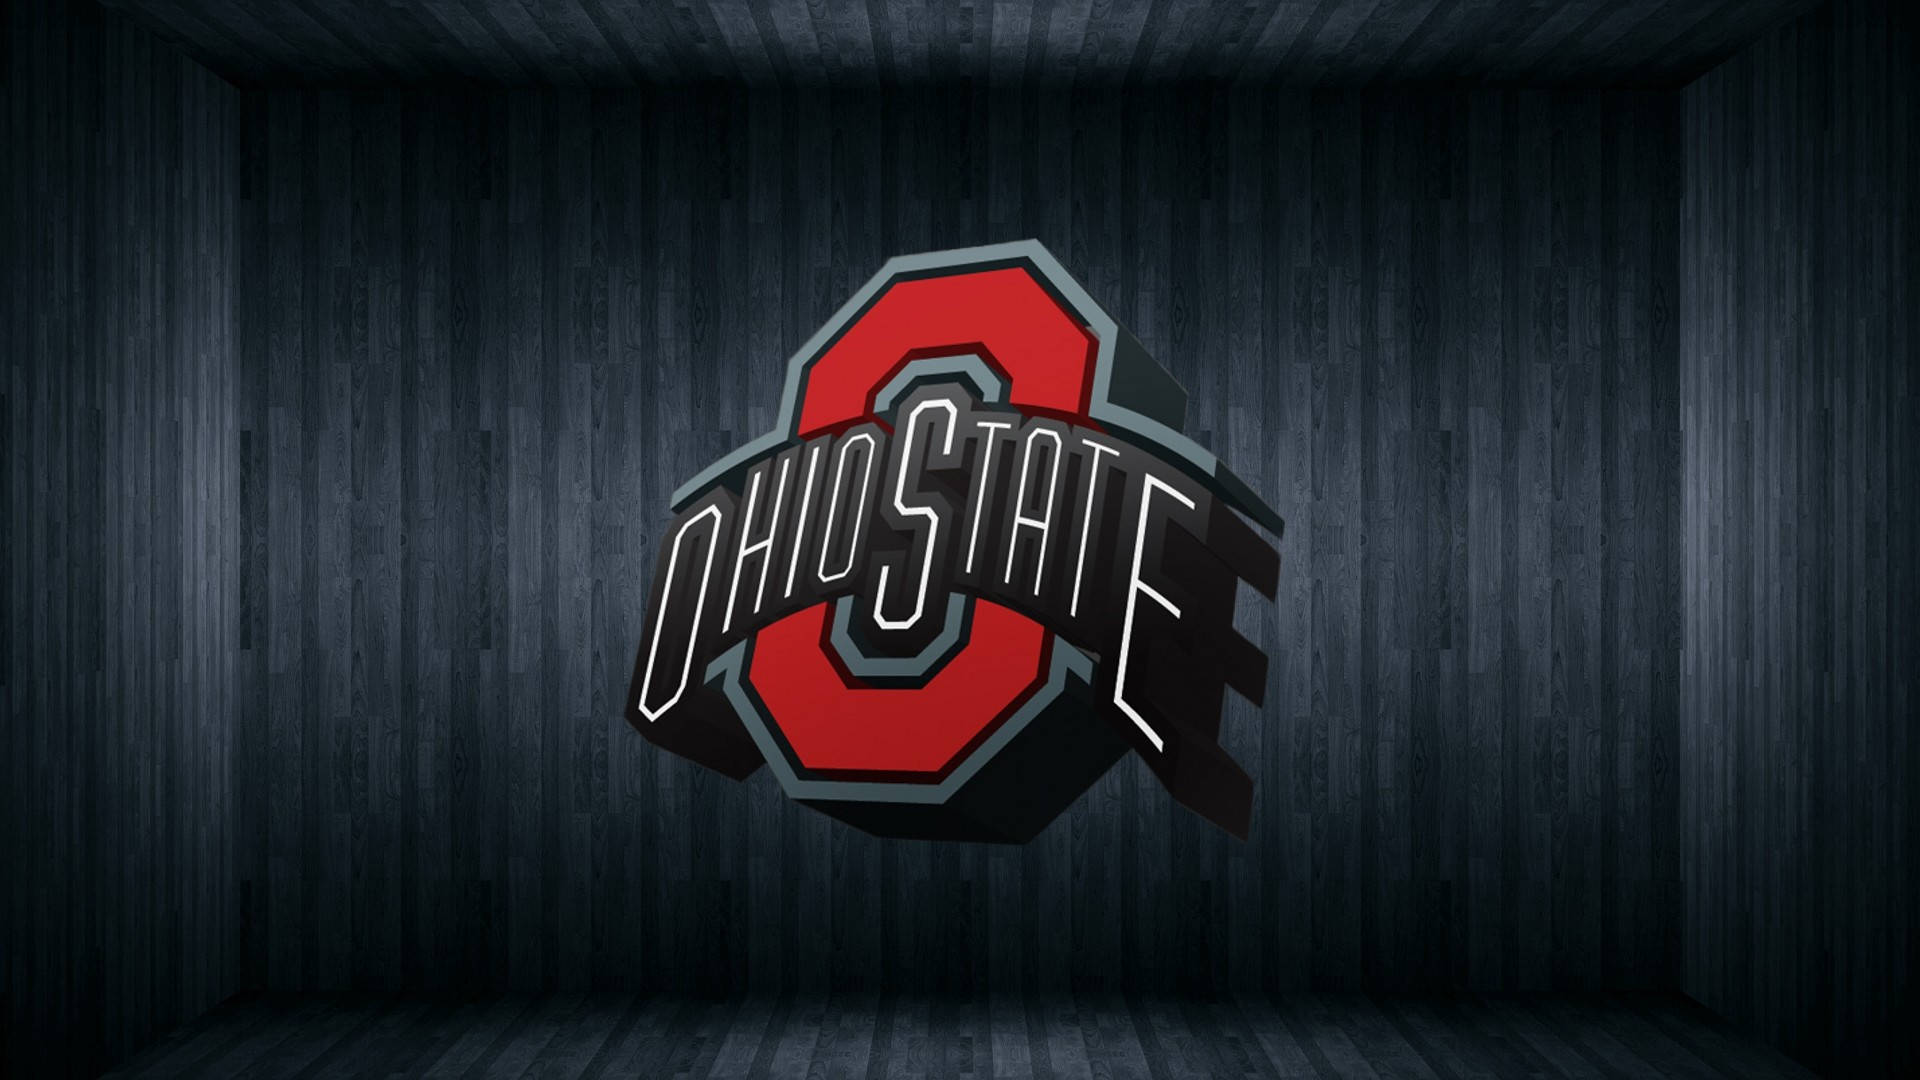 Majestic View of Ohio State University on a Dark Wood Background Wallpaper